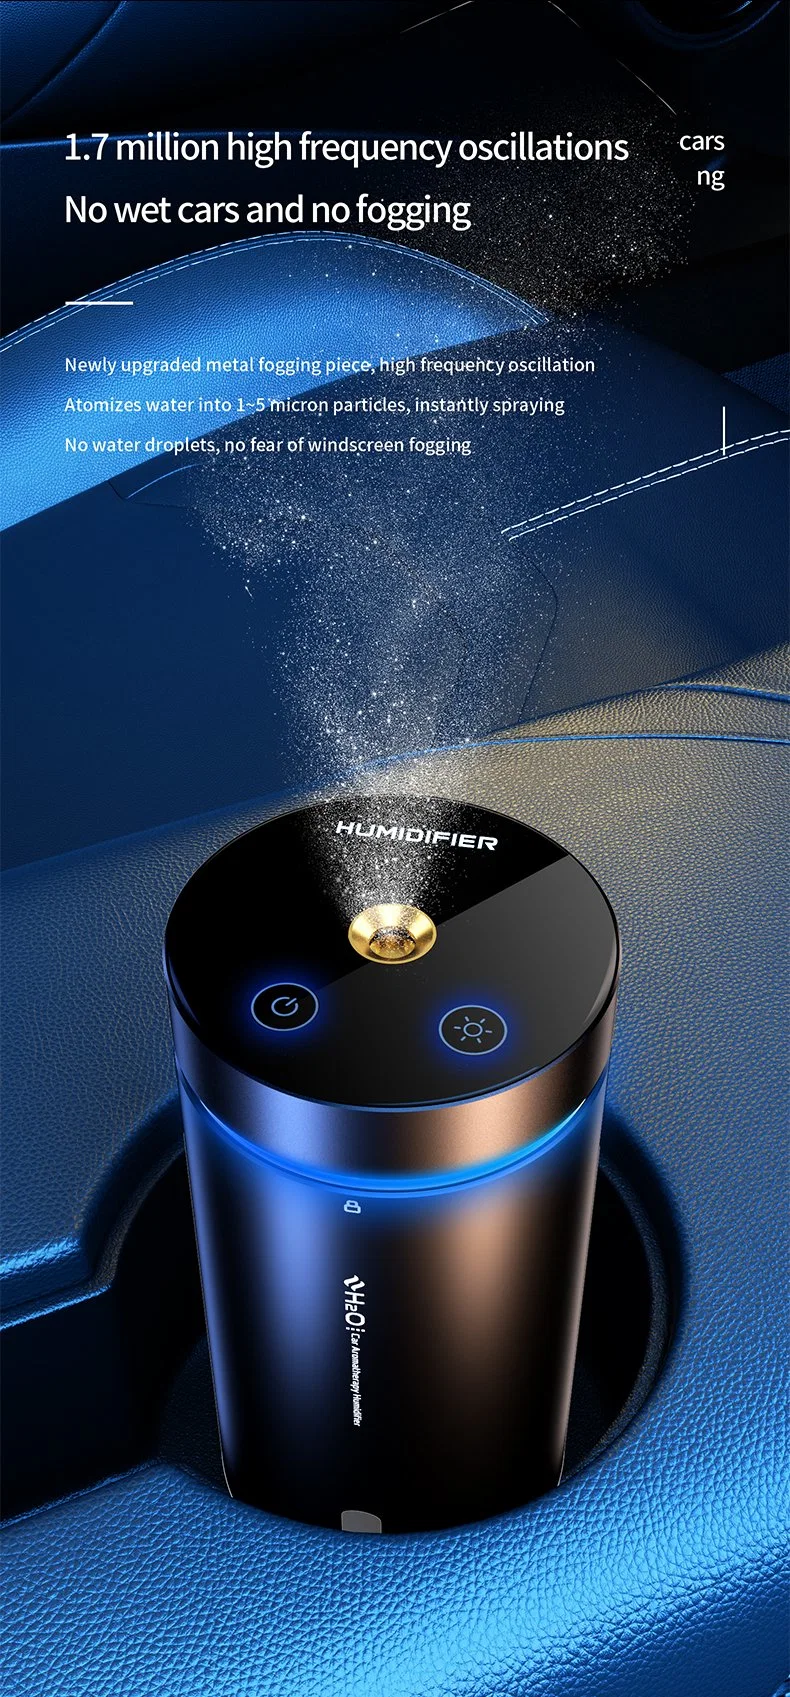 Car Wireless Smart Humidifier Aromatherapy Essential Oil Smart Air Freshener Perfume